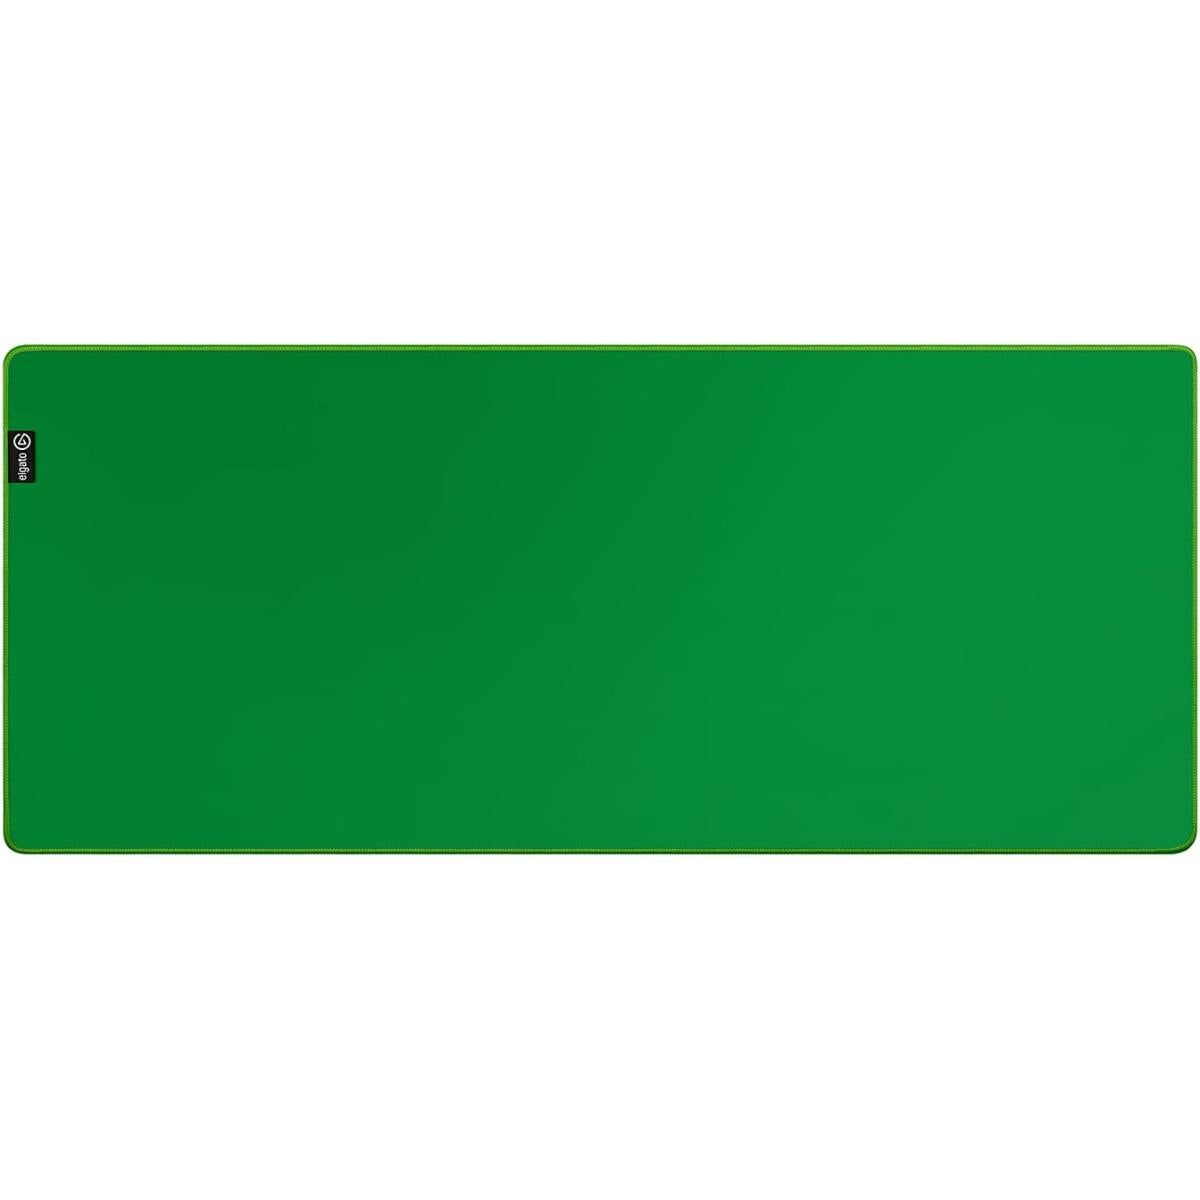 Corsair Elgato Green Screen Smooth Surface Mouse Mat XL Chroma Key Pad (940 x 400 x 2mm) For Overhead Streaming Or Capturing